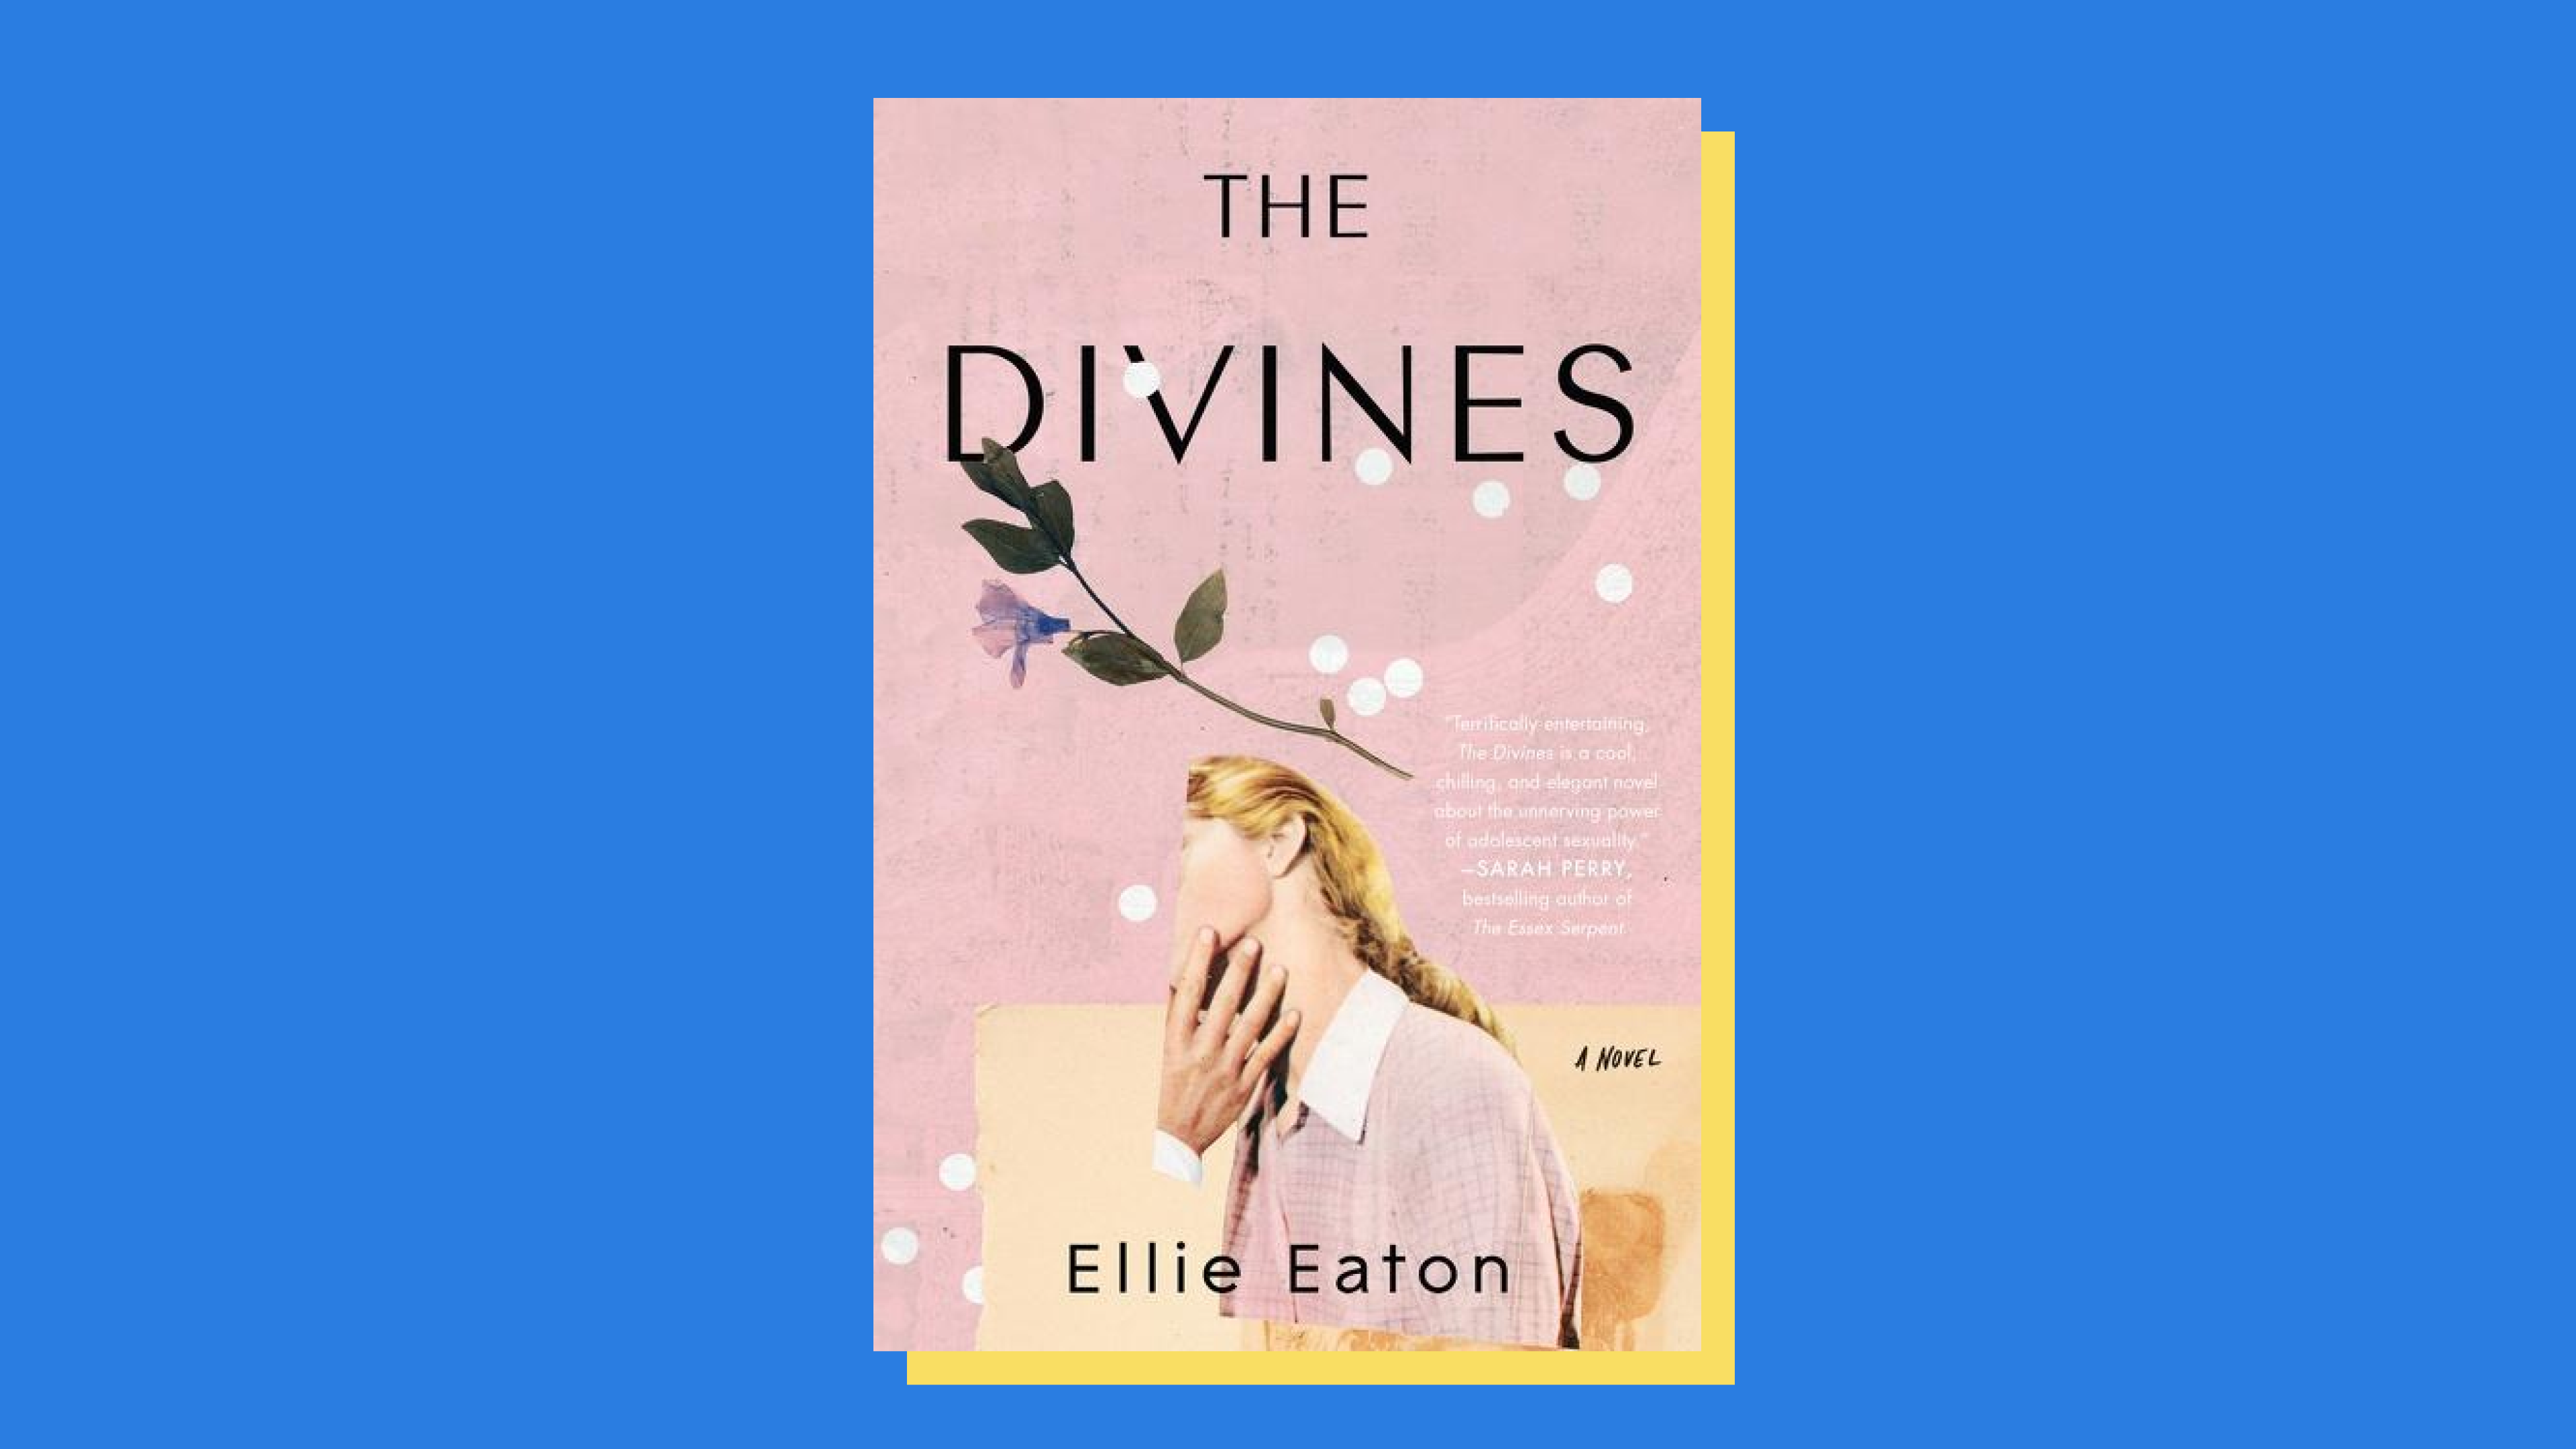 “The Divines” by Ellie Eaton